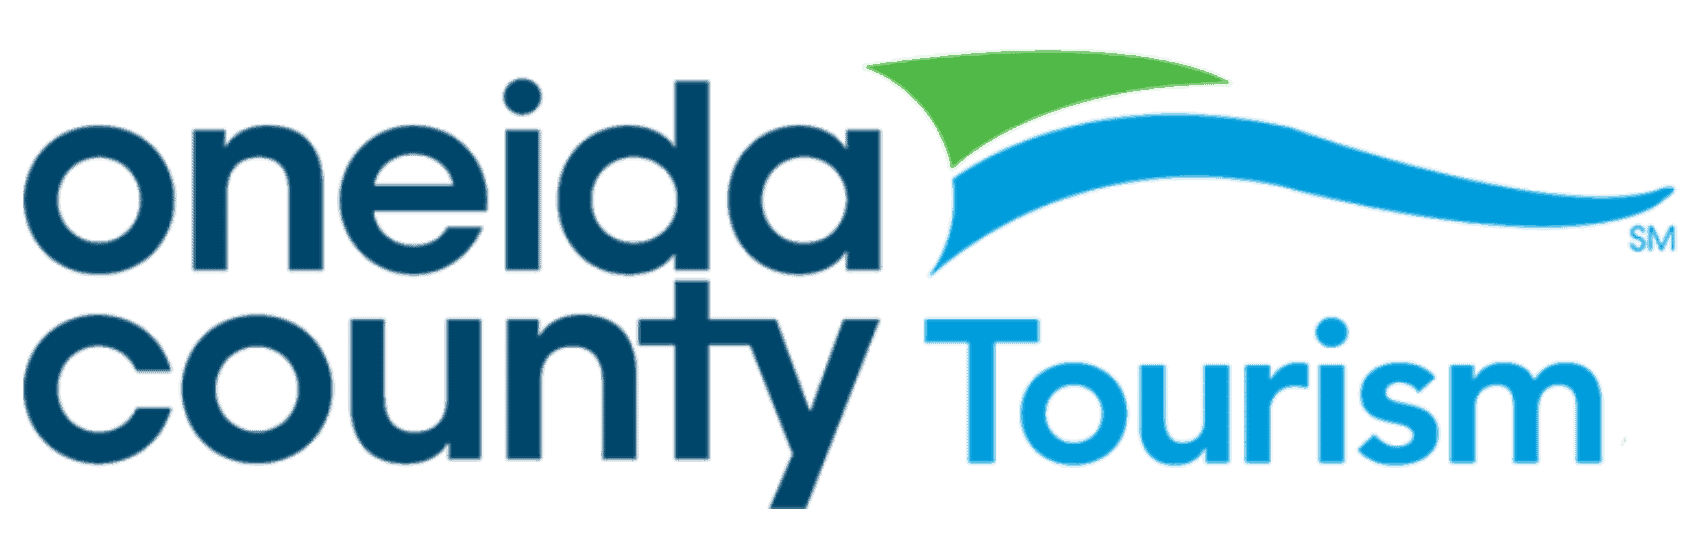 Oneida County asking businesses to add, update listings on official tourism website